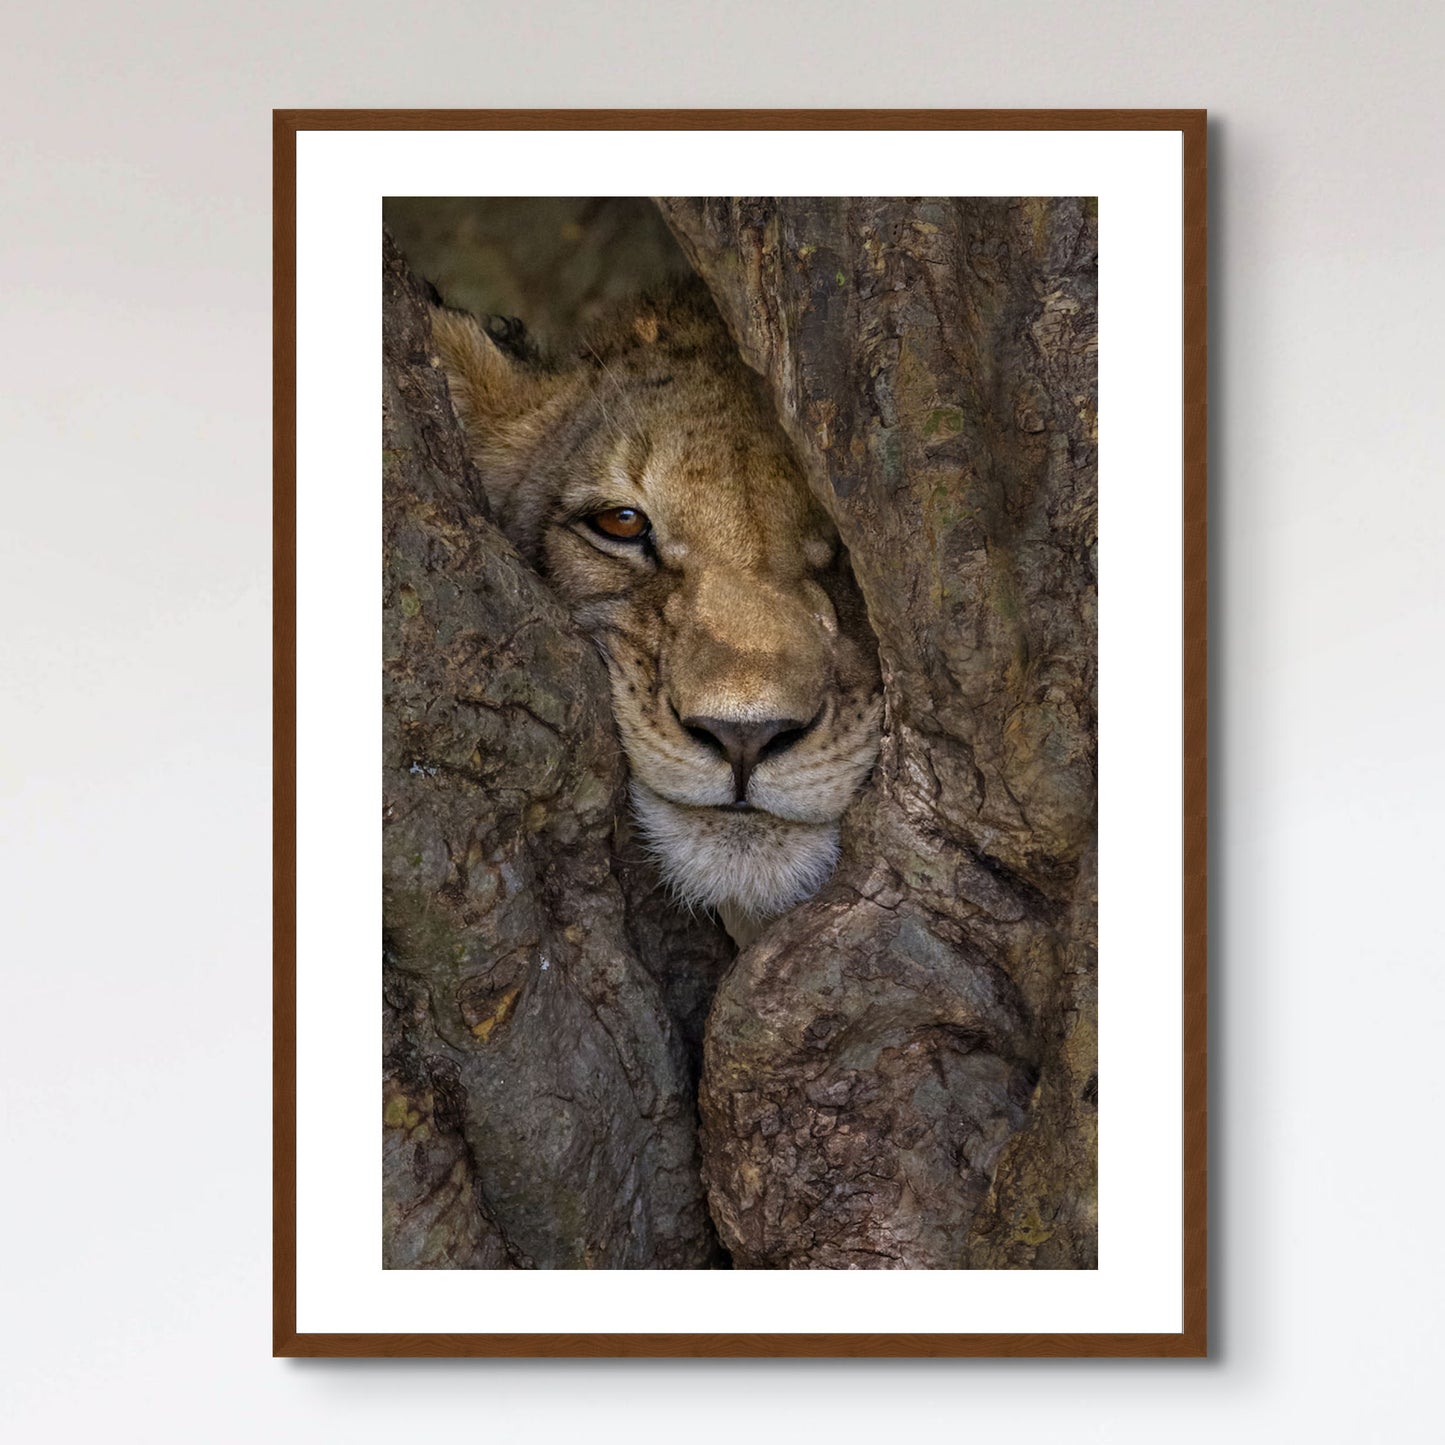 Lion cub in the tree in Kenya, Africa